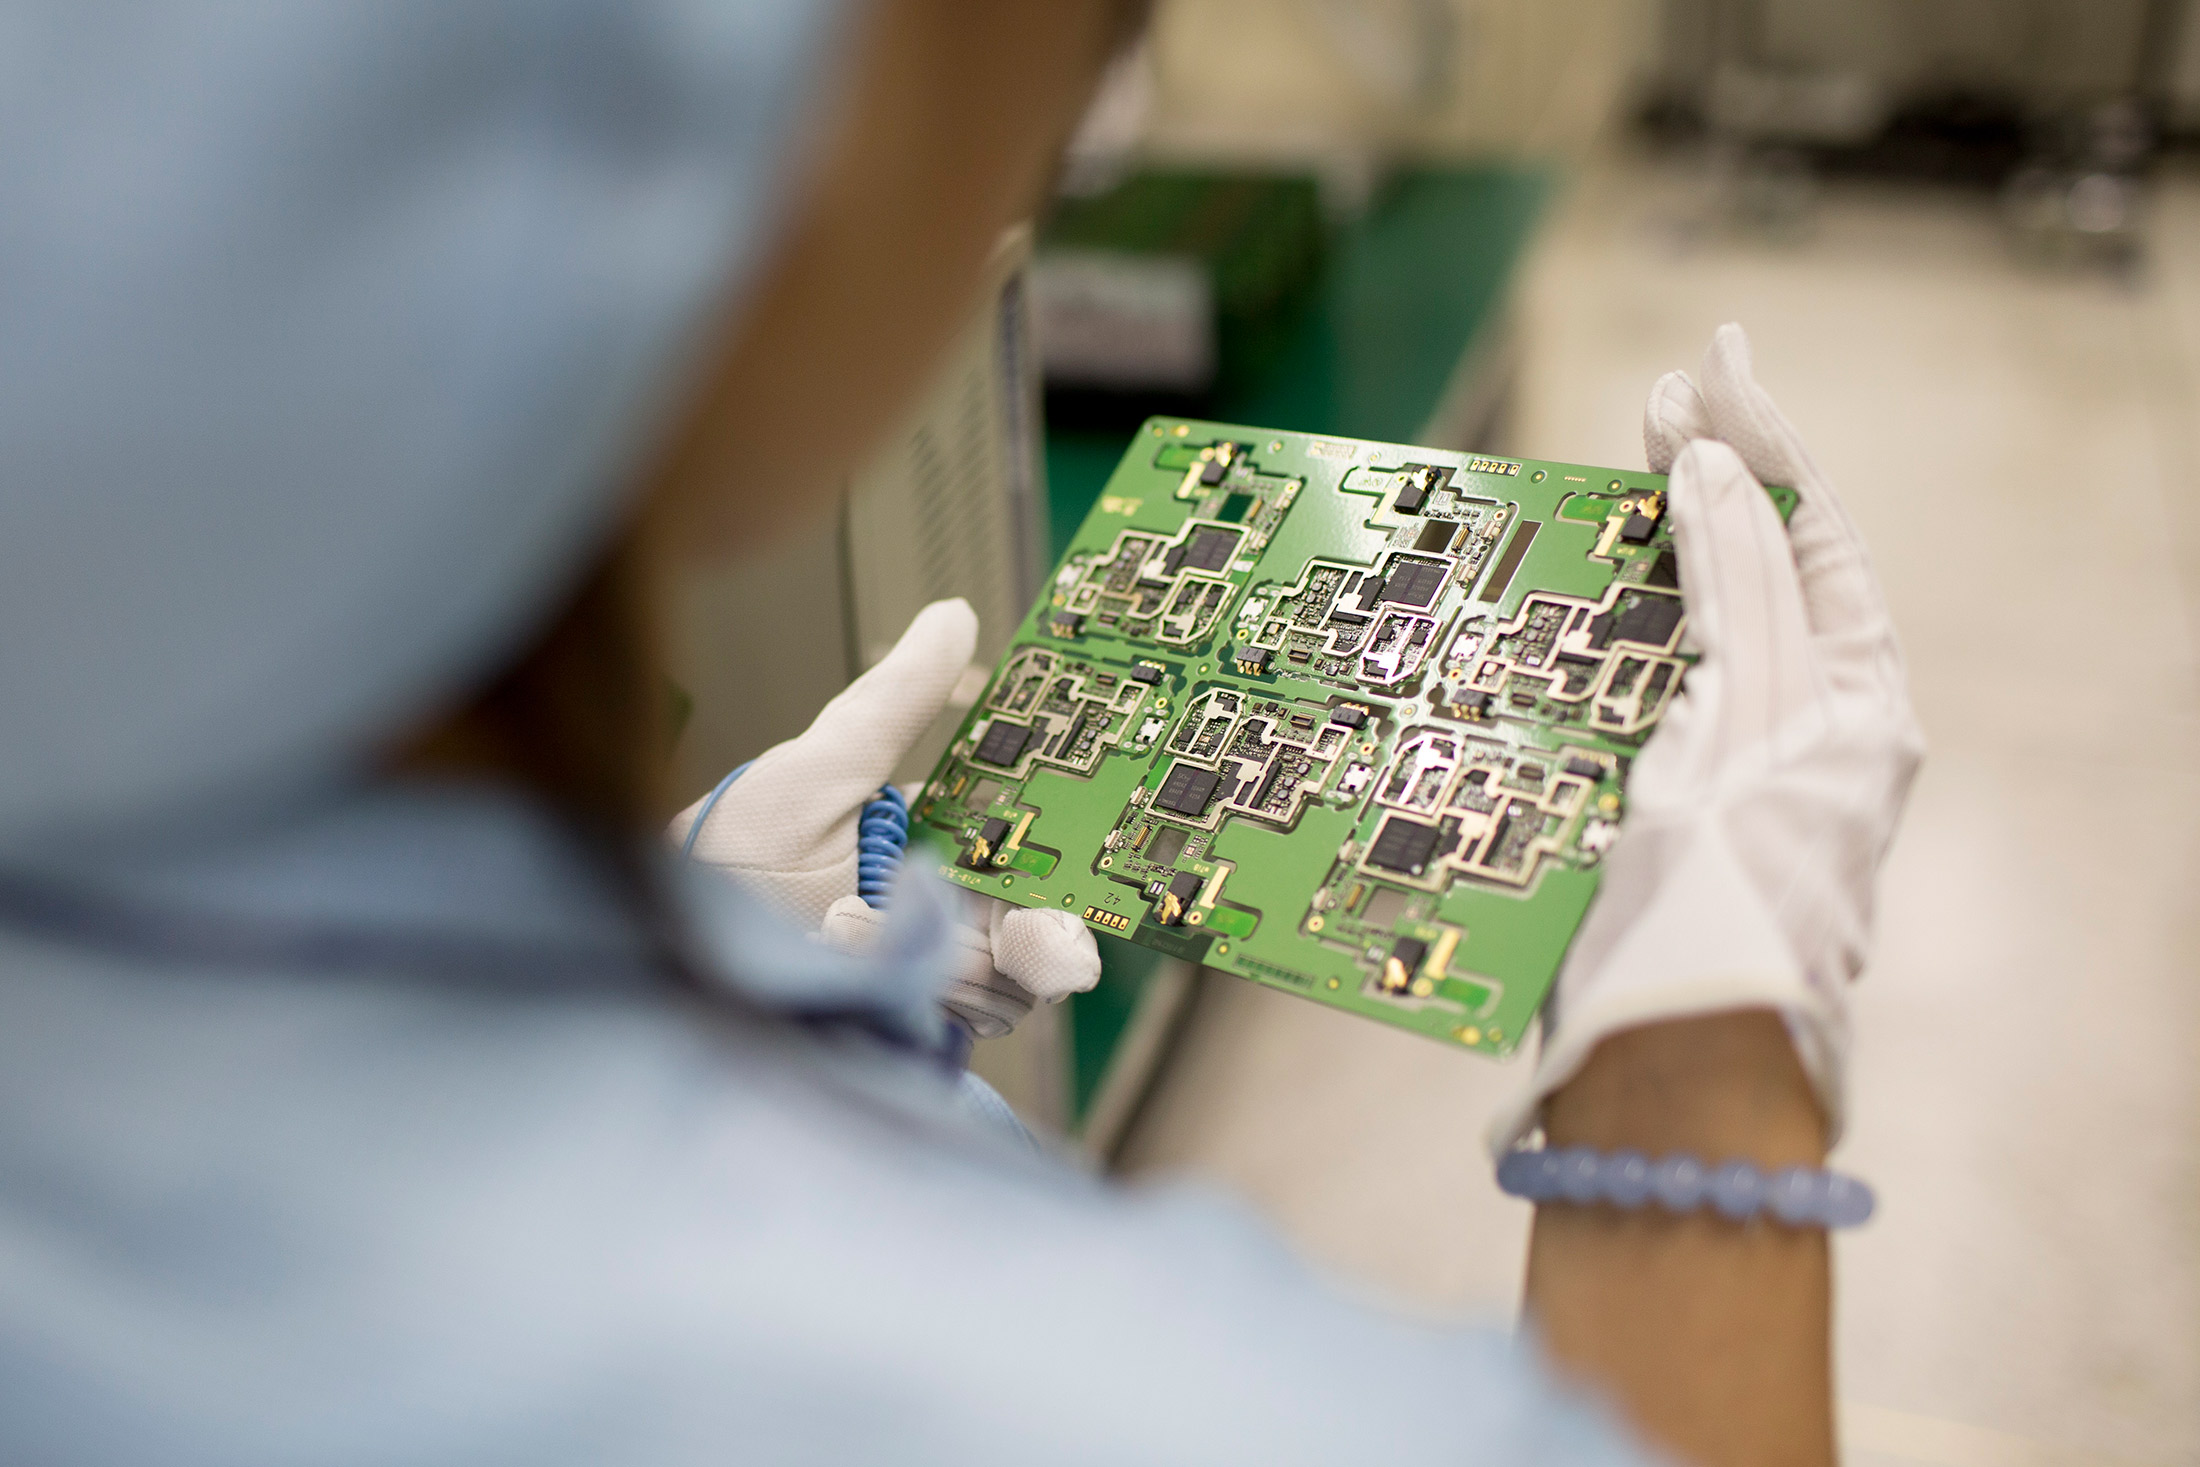 A worker inspects smartphone circuit boards at a ZTE manufacturing facility in Shenzhen, China.
